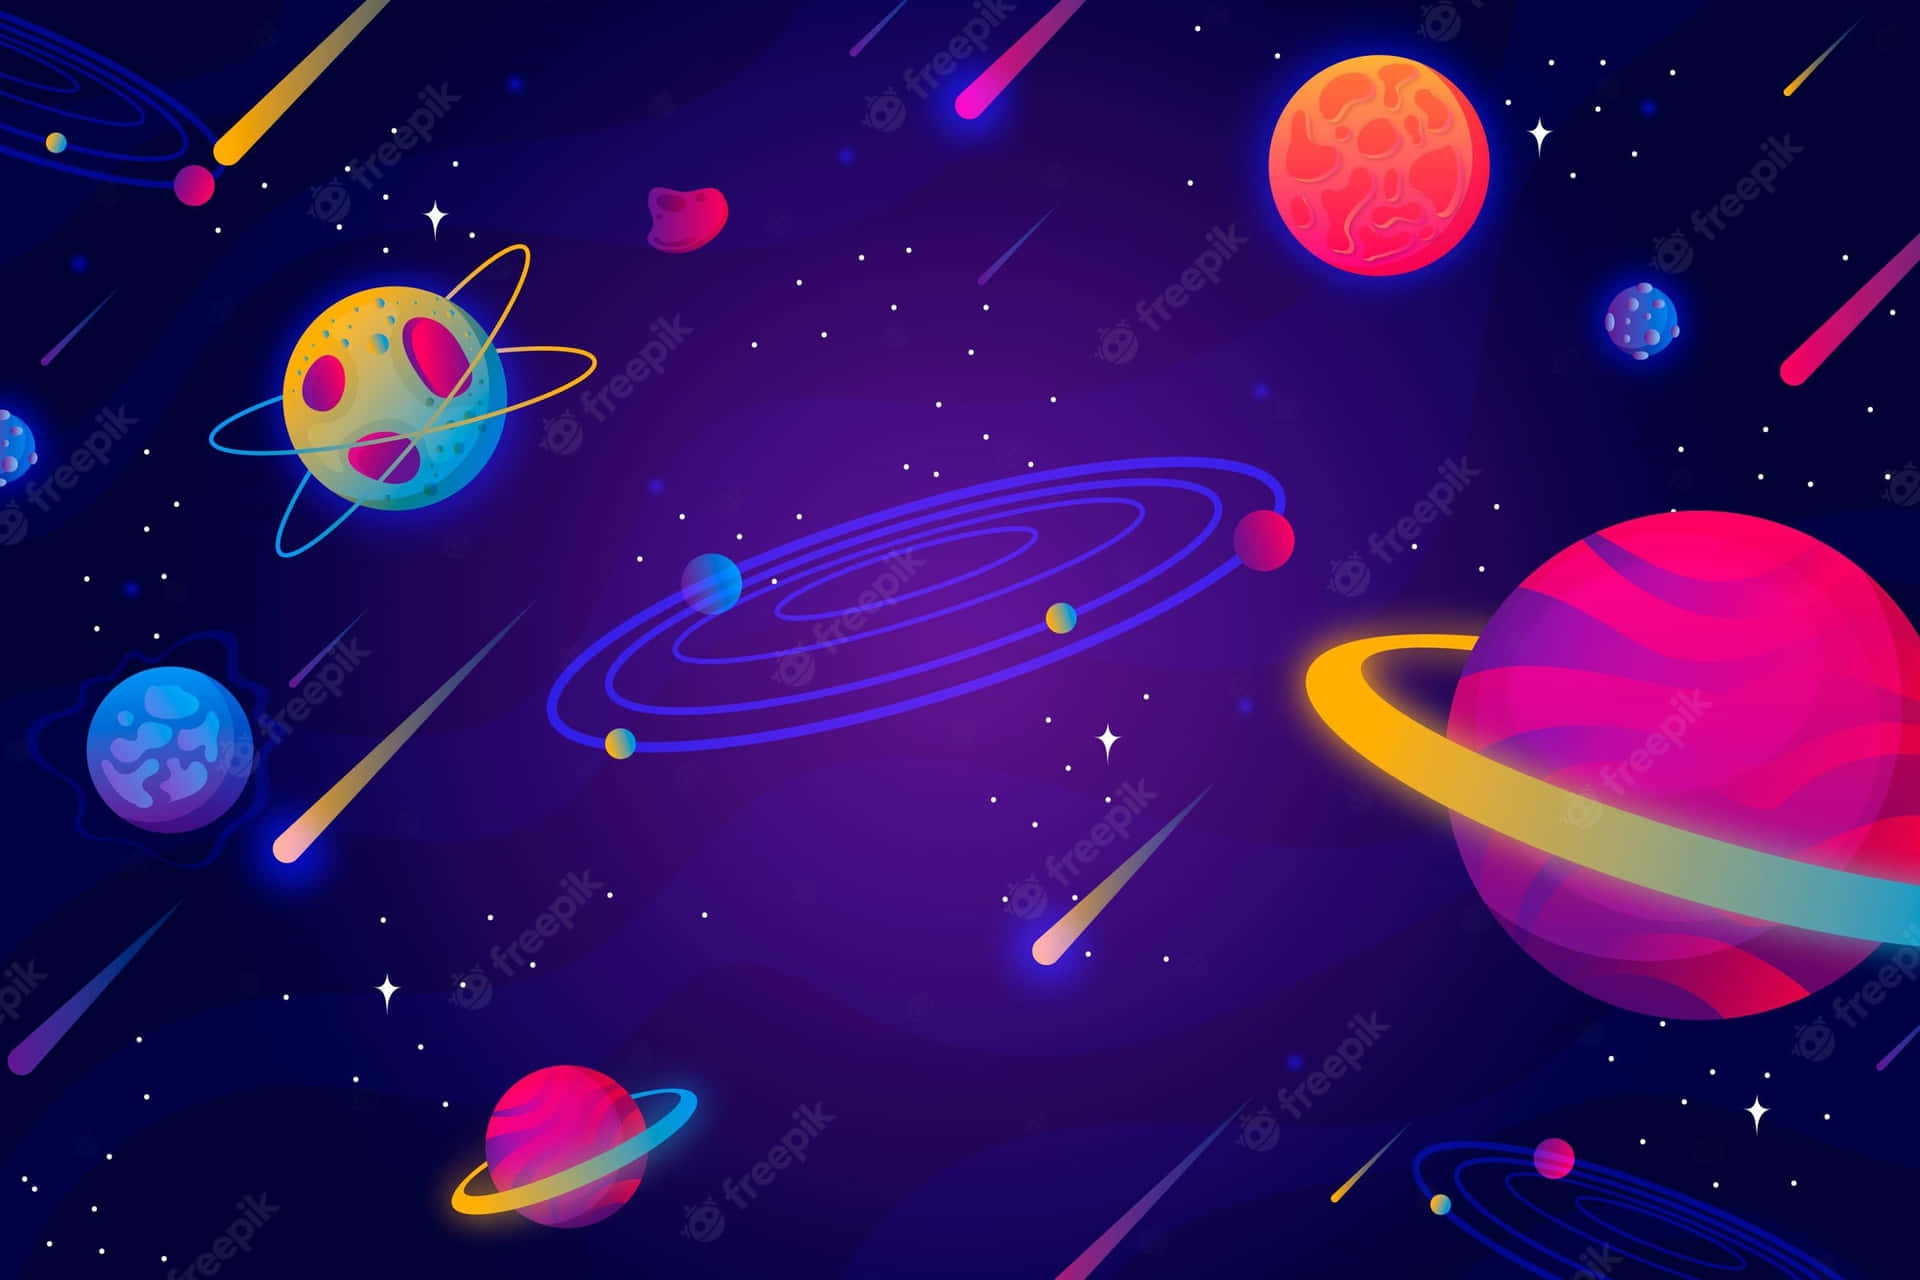 100 Animated Space Wallpapers